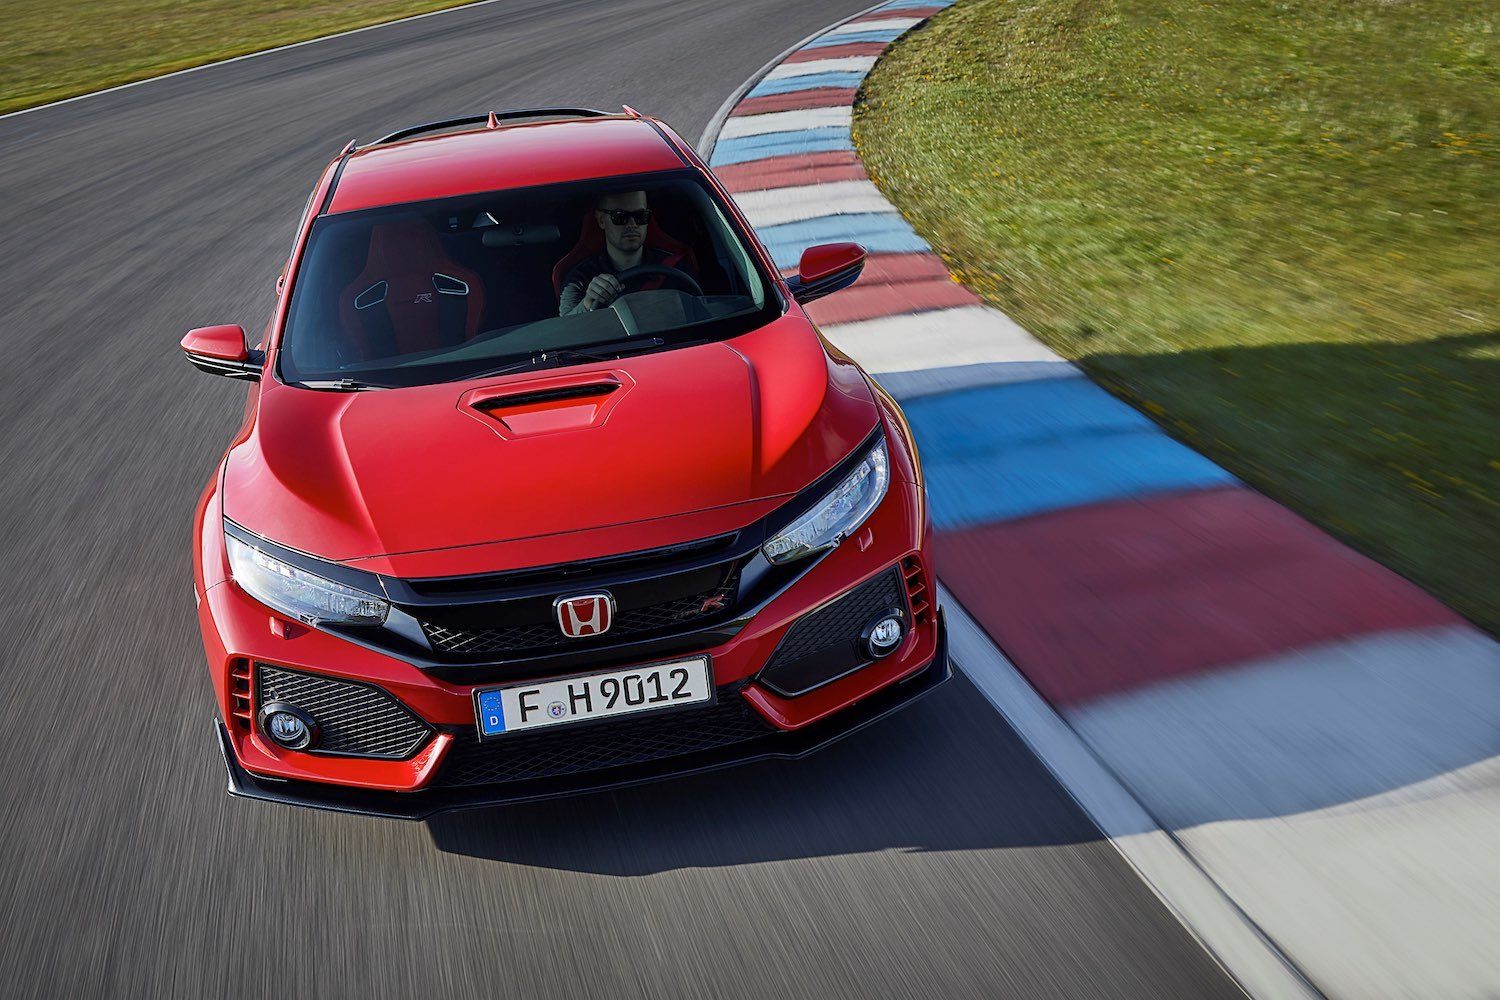 Tim Barnes-Clay reviews the 2018 Honda Civic Type R at the first drives 7